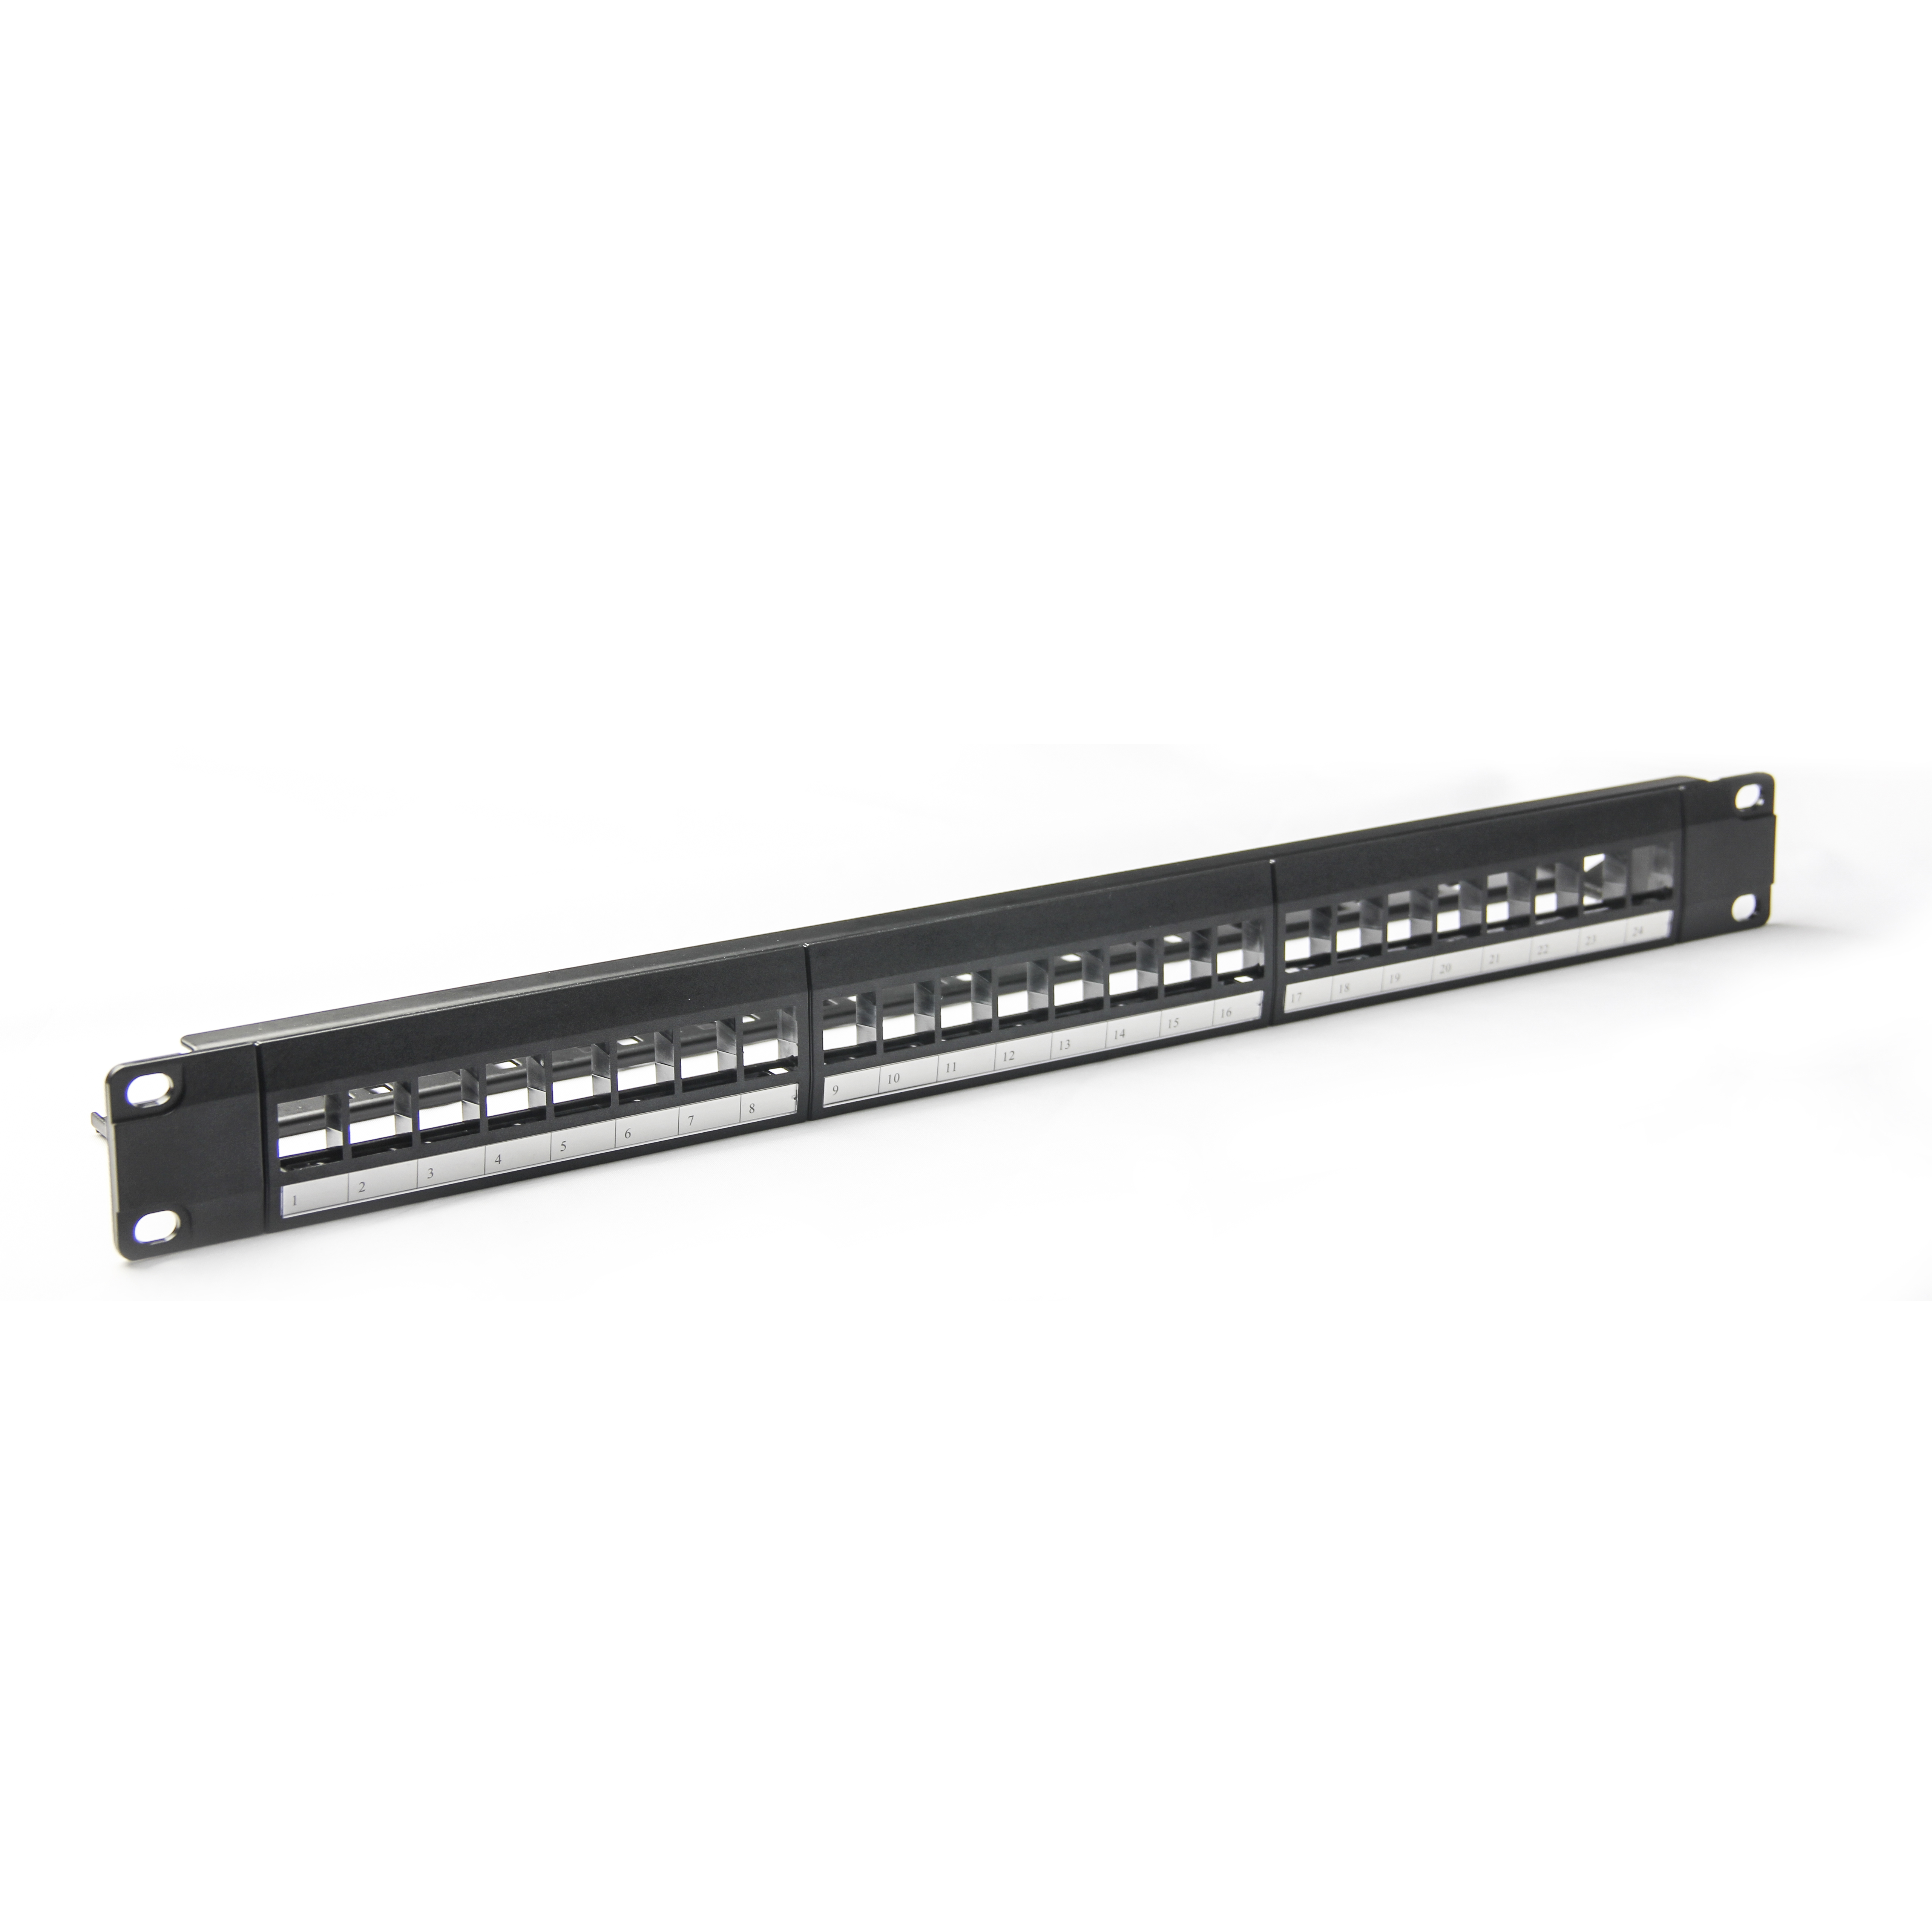 1U 19inch Blank patch panel with rear cable management